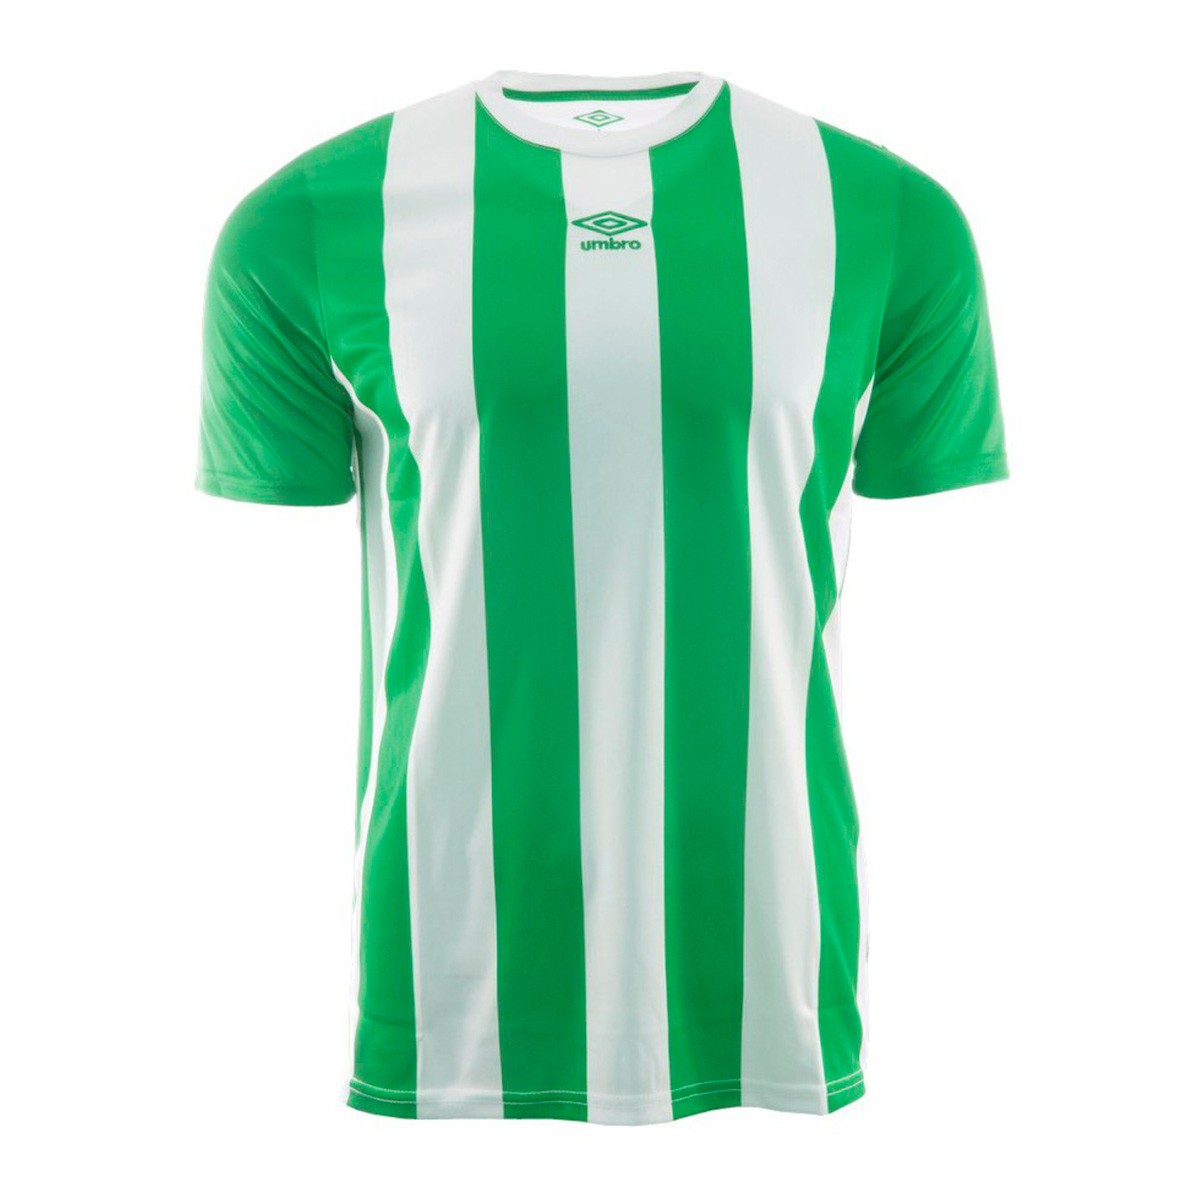 green and white jersey